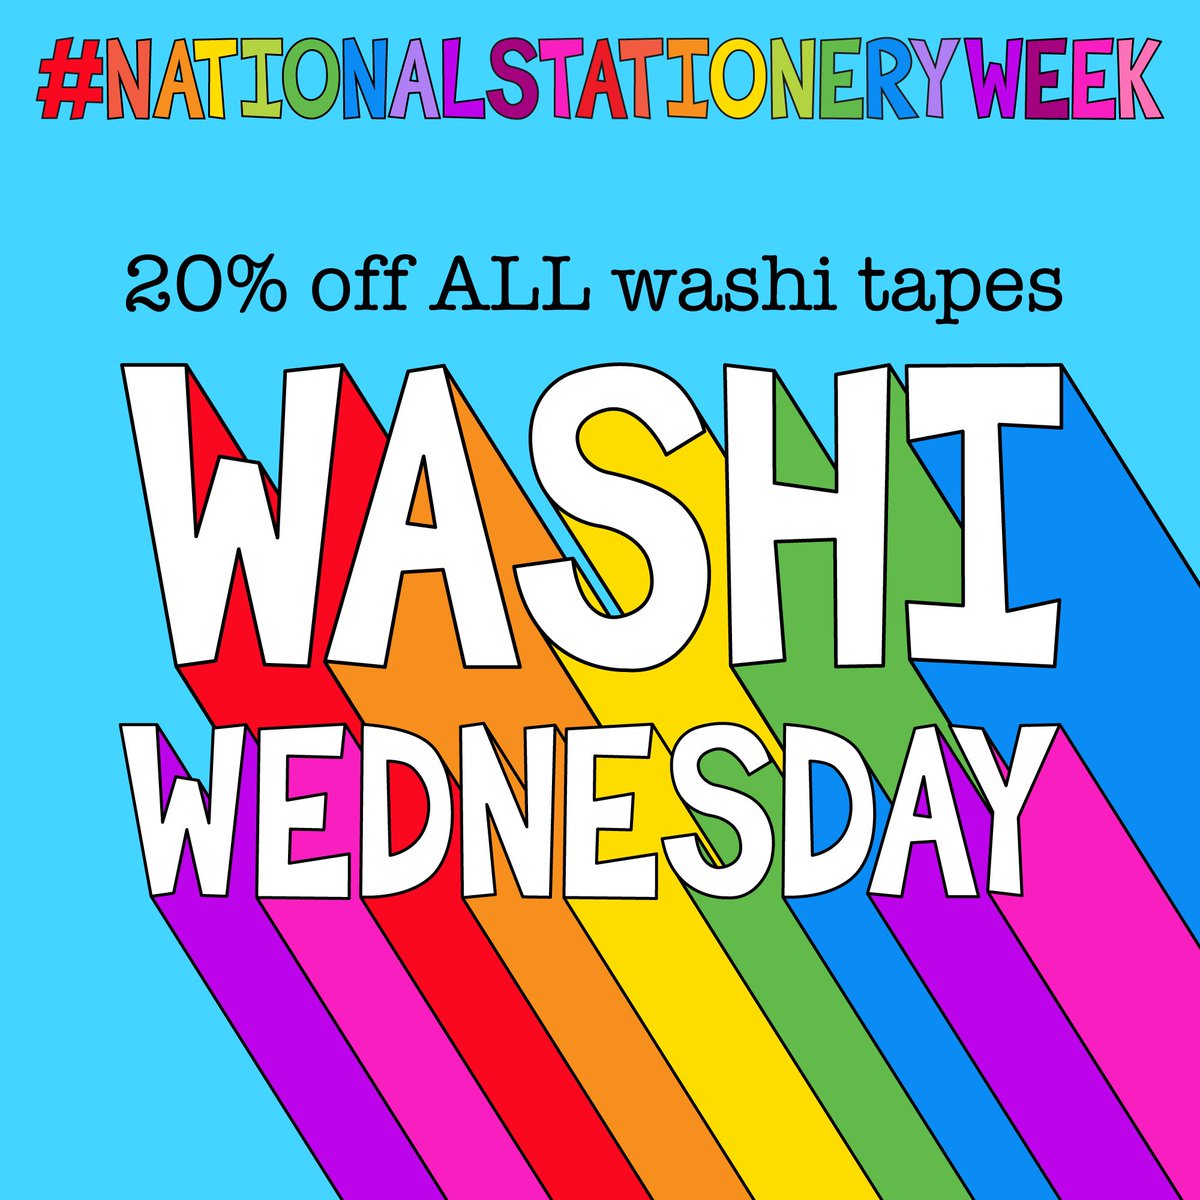 Pop along to my website (between NOW and MIDNIGHT tonight) and you’ll find 20% off ALL washi tapes!

colourtheirday.com/shop/gift-wrap…

❤️🧡💛💚💙💜💖
#washitapeaddict #washitapelover #natstatweek #nationalstationeryweek #worldstationeryday